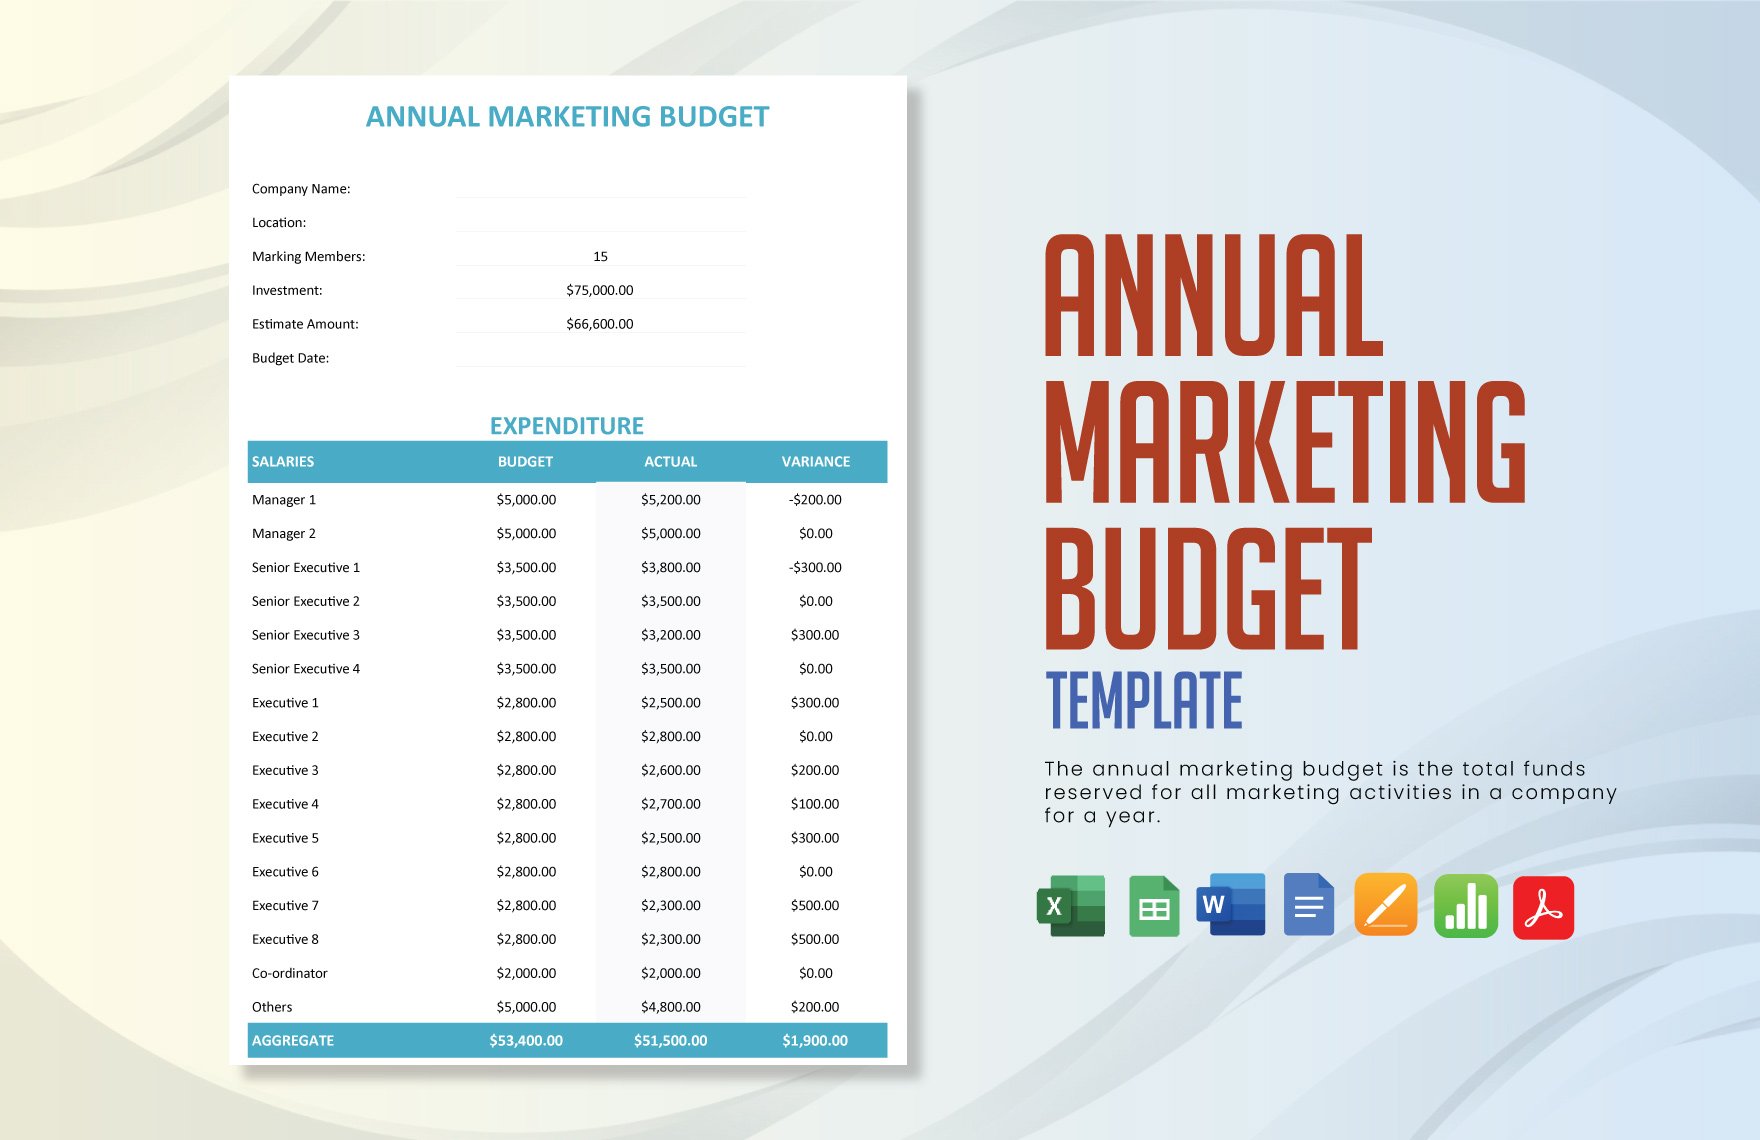 Annual Marketing Budget Template in Word, Google Docs, Excel, PDF, Google Sheets, Apple Pages, Apple Numbers